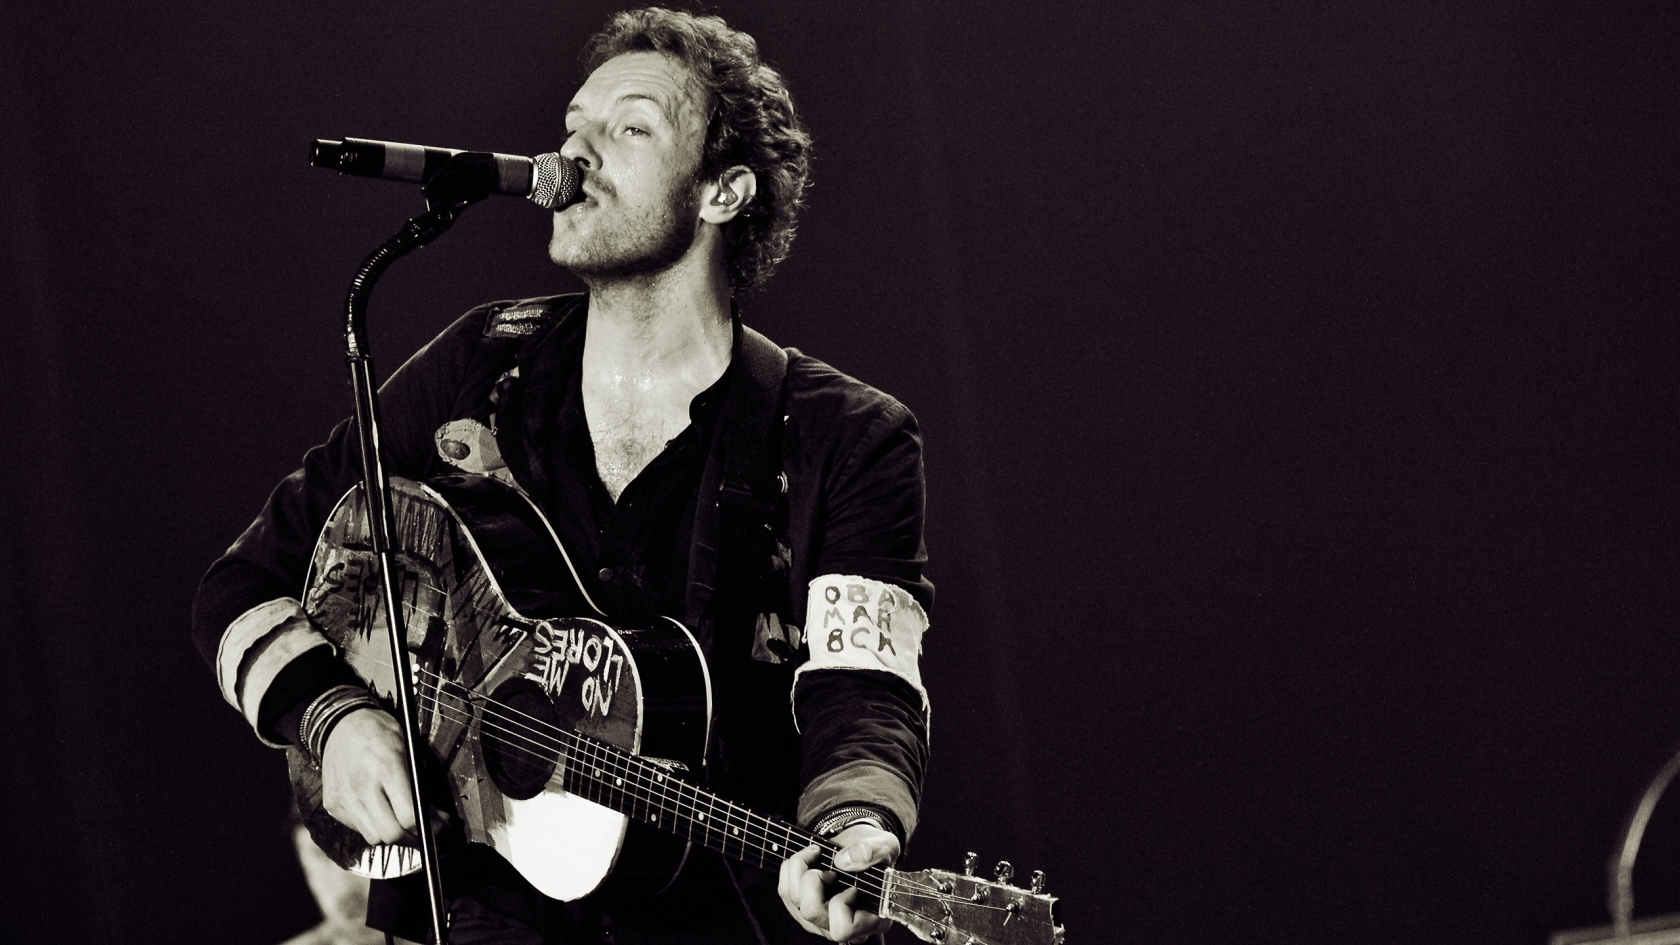 Chris Martin Coldplay for 1680 x 945 HDTV resolution